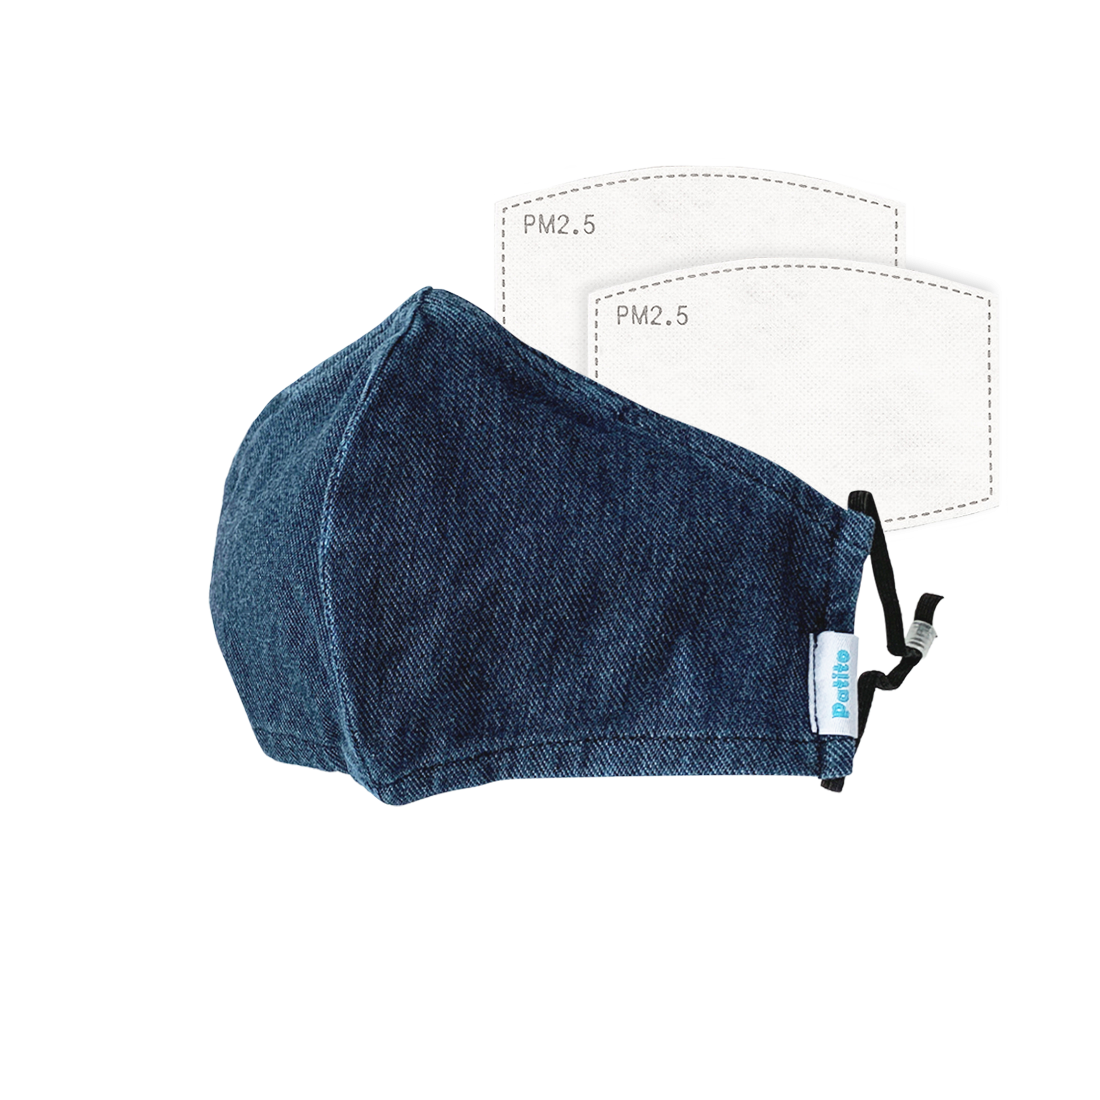 Extra Guard Silver Ions Double Layered Mask - Adult - Denim - EG3020 - (Includes PM2.5 Filters x 2)